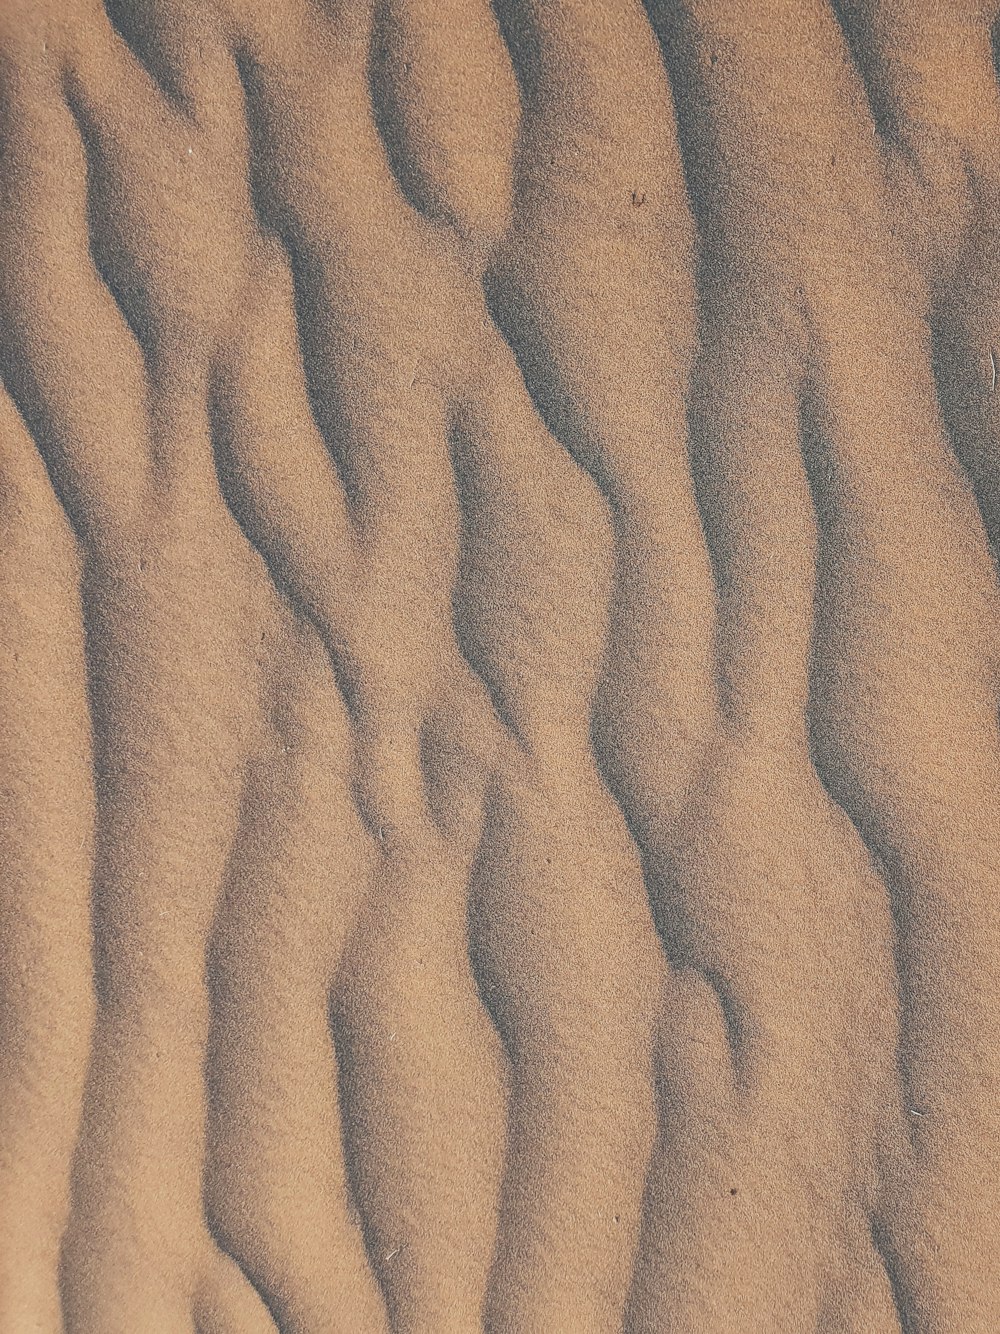 close view of sand dunes